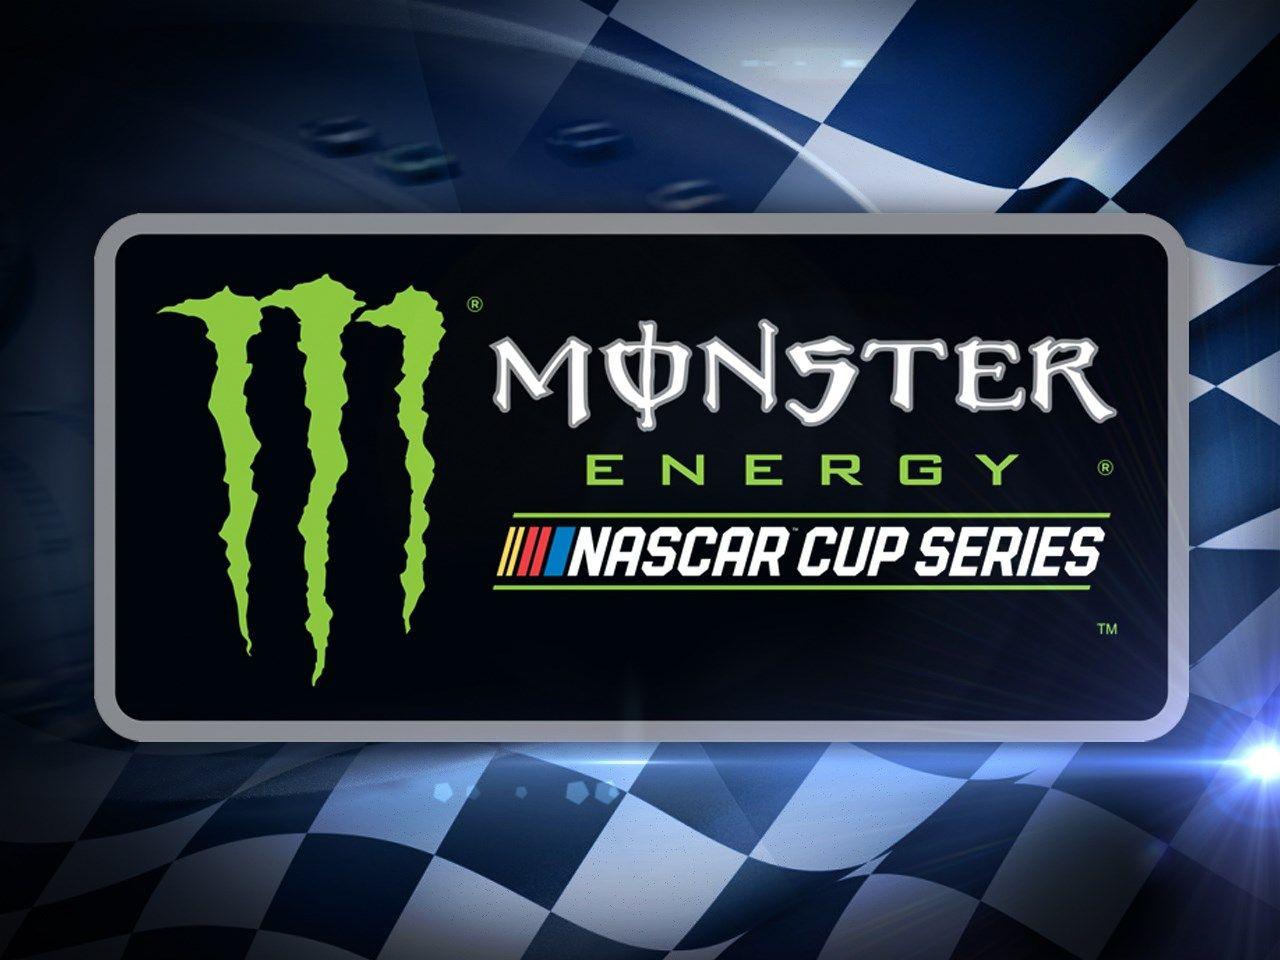 NASCAR Monster Energy Logo - NASCAR introduces new rules packages for 2019